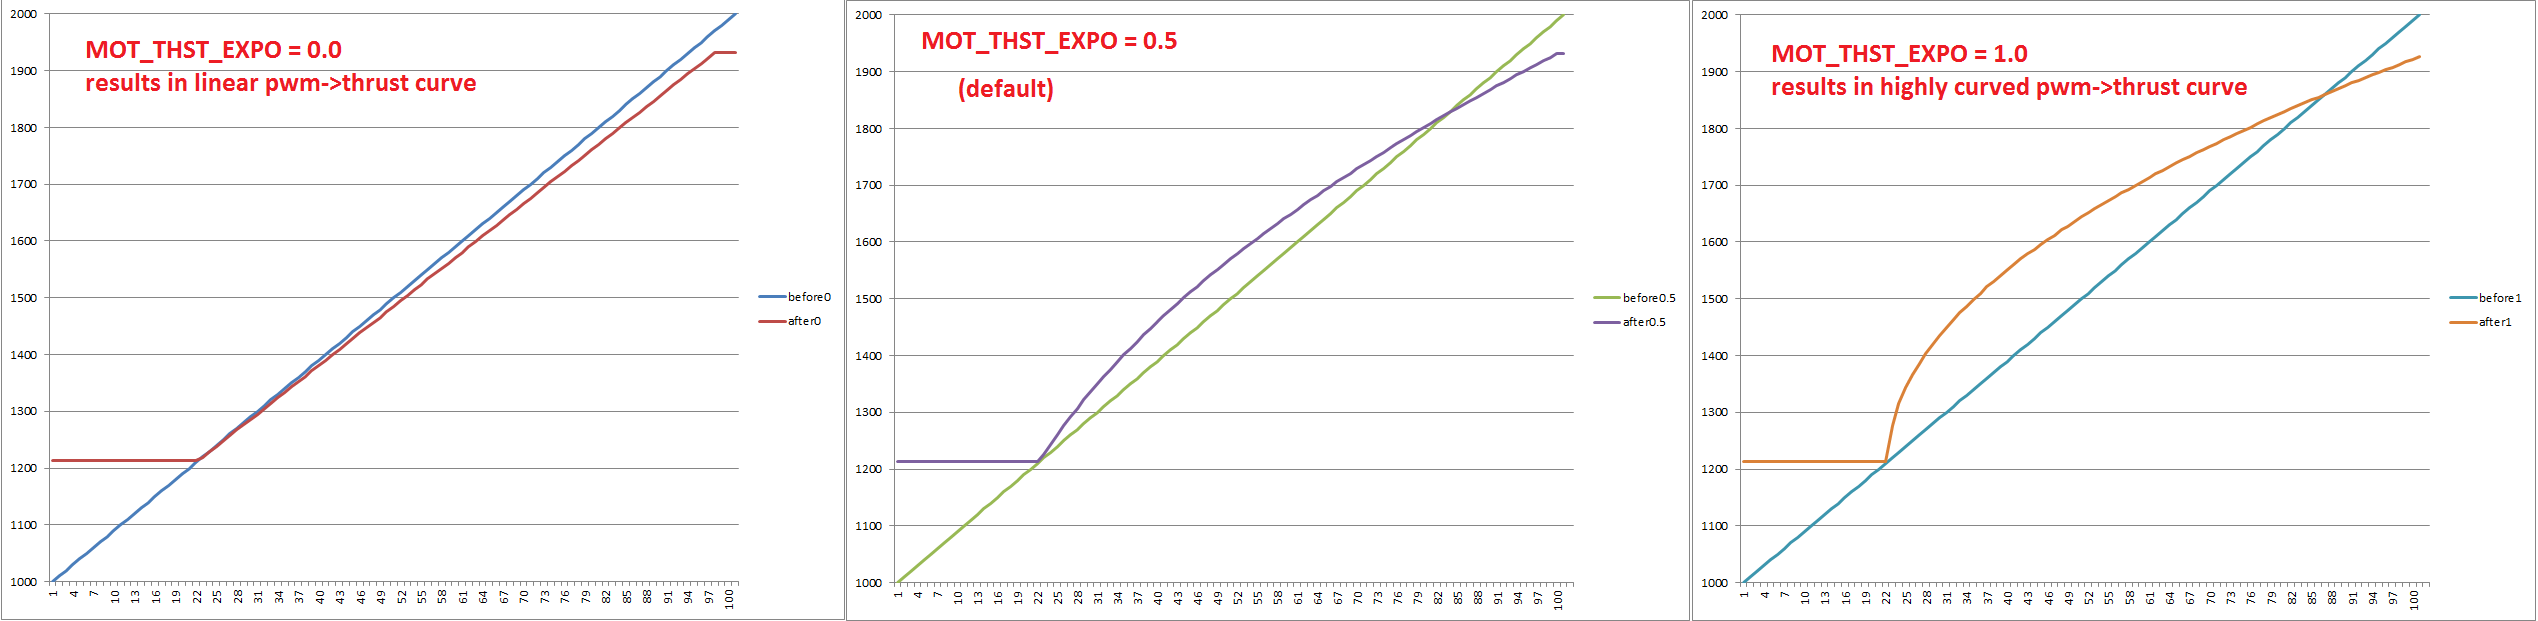 ../_images/MotThstExpo_graphs2.png